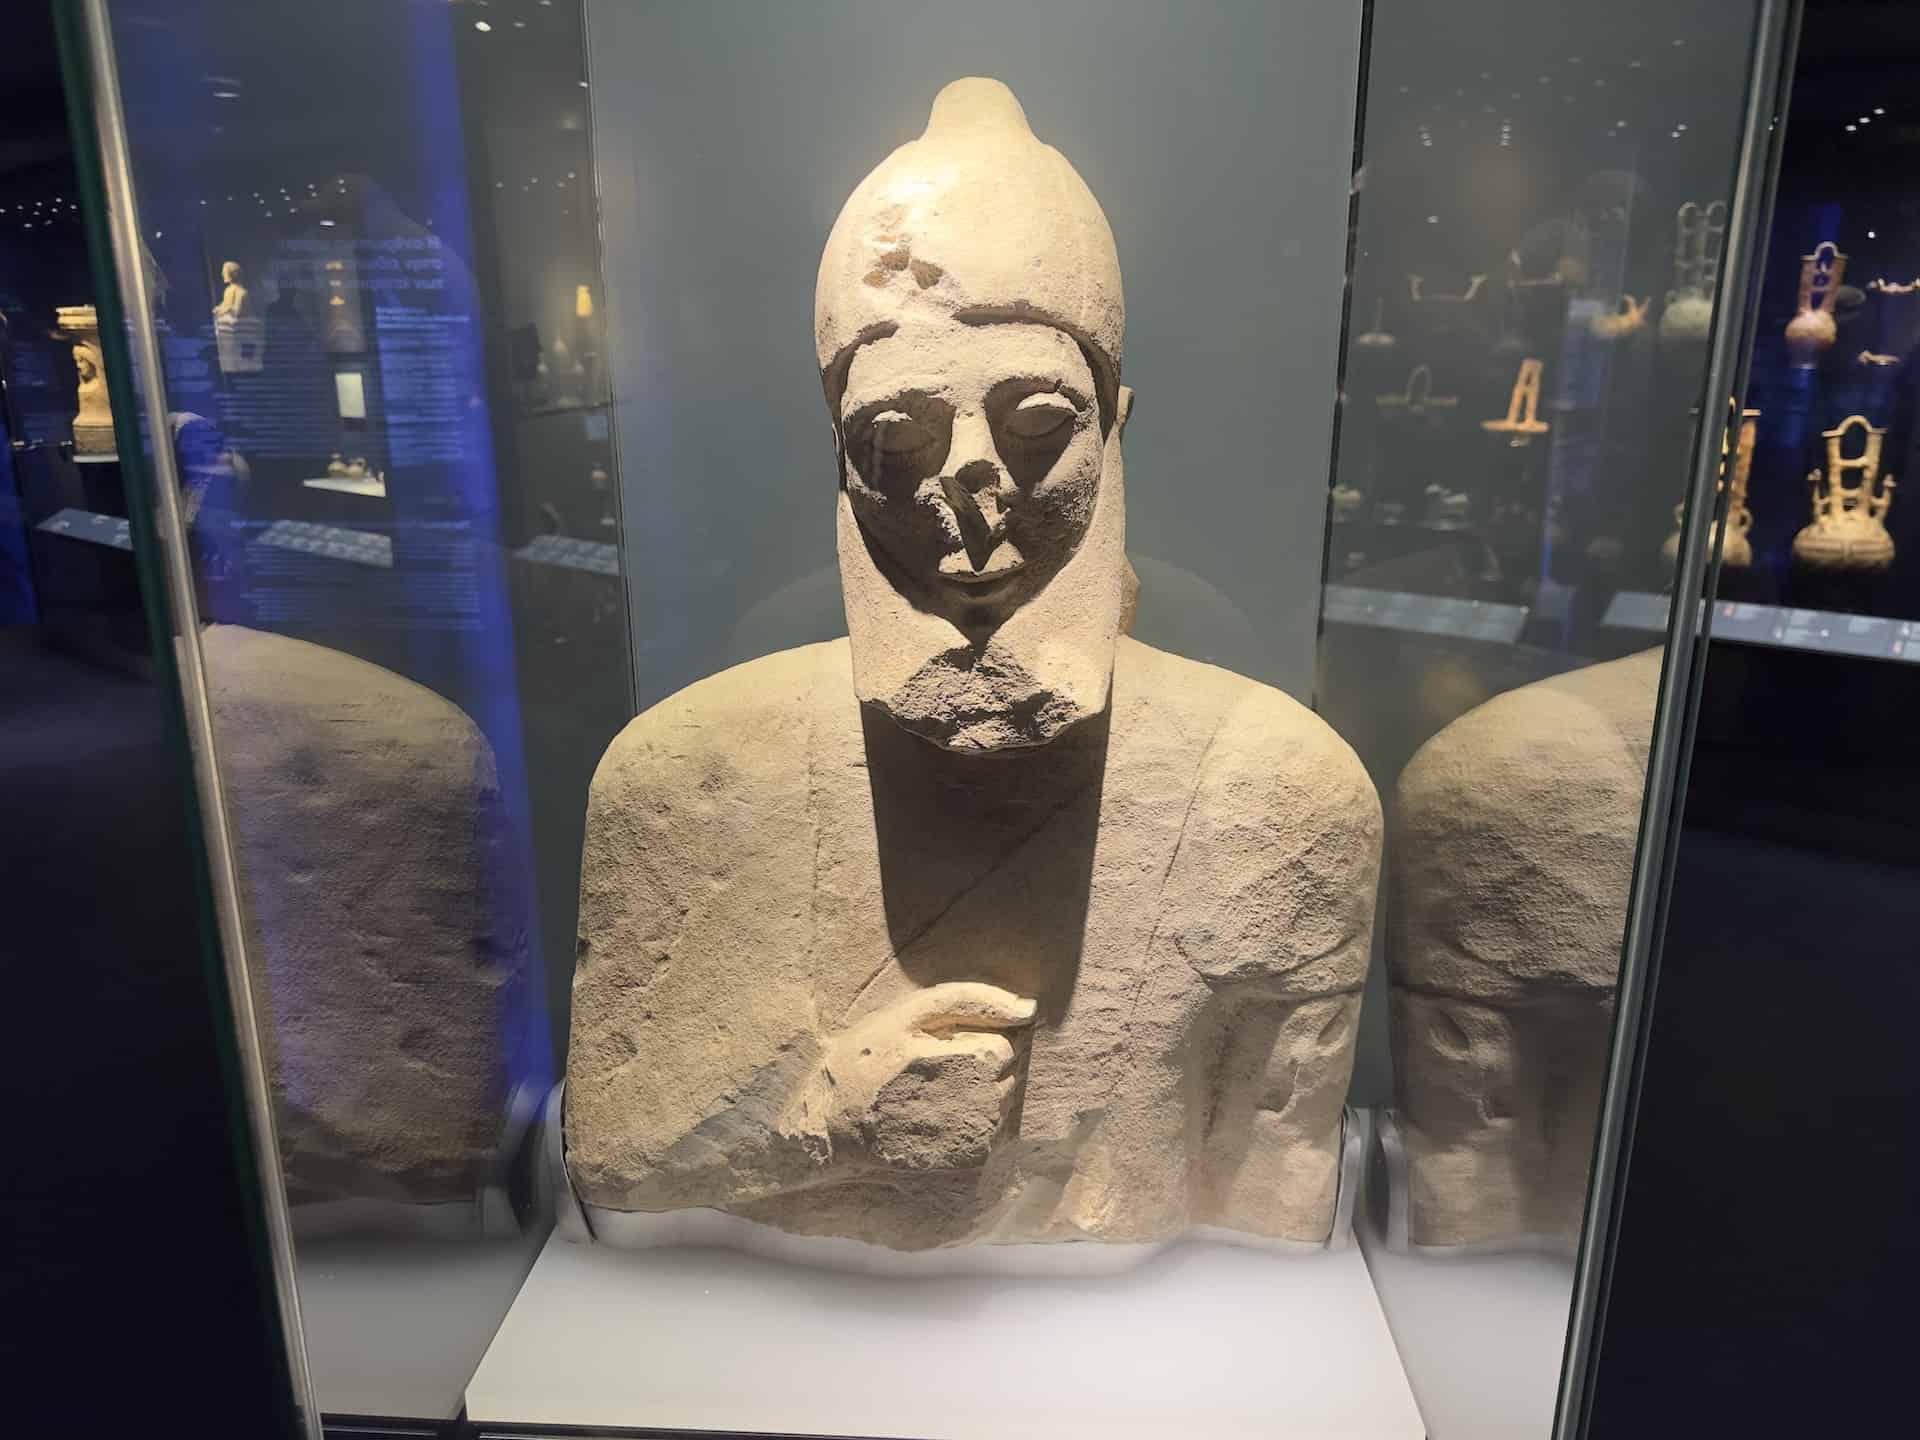 Bust of bearded male figure wearing a conical crested cap; limestone; Cypro-Archaic II, mid 6th century BC in Cypriot Culture at the Museum of Cycladic Art in Athens, Greece